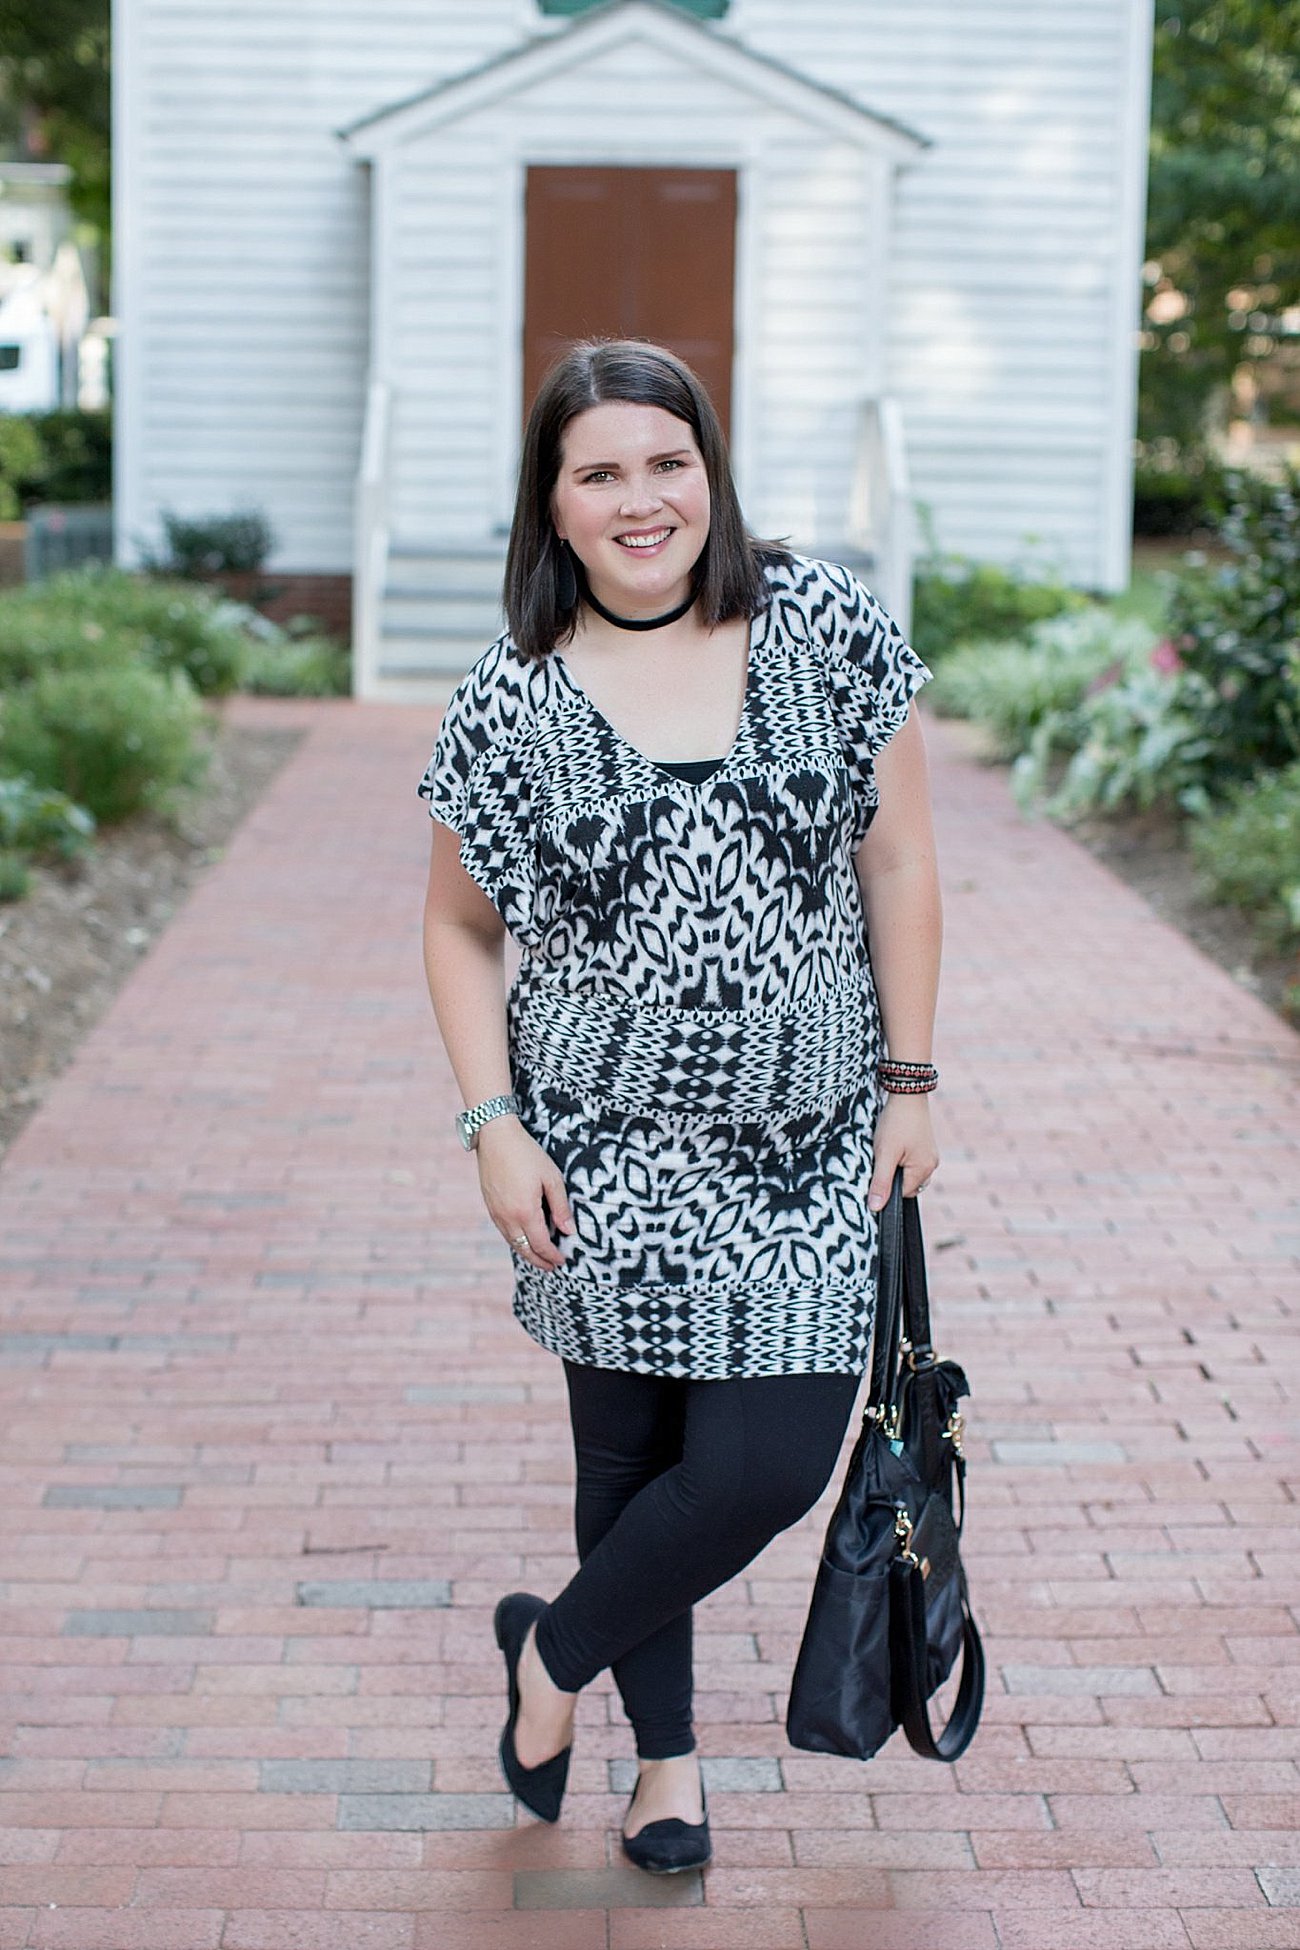 Threads for Thought "Mia Dress", LulaRoe black leggings, Lily Jade diaper bag, Nickel & Suede choker, Nickel & Suede earrings, Darzah stitched leather cuff | ethical fashion blogger, north carolina fashion blogger (7)